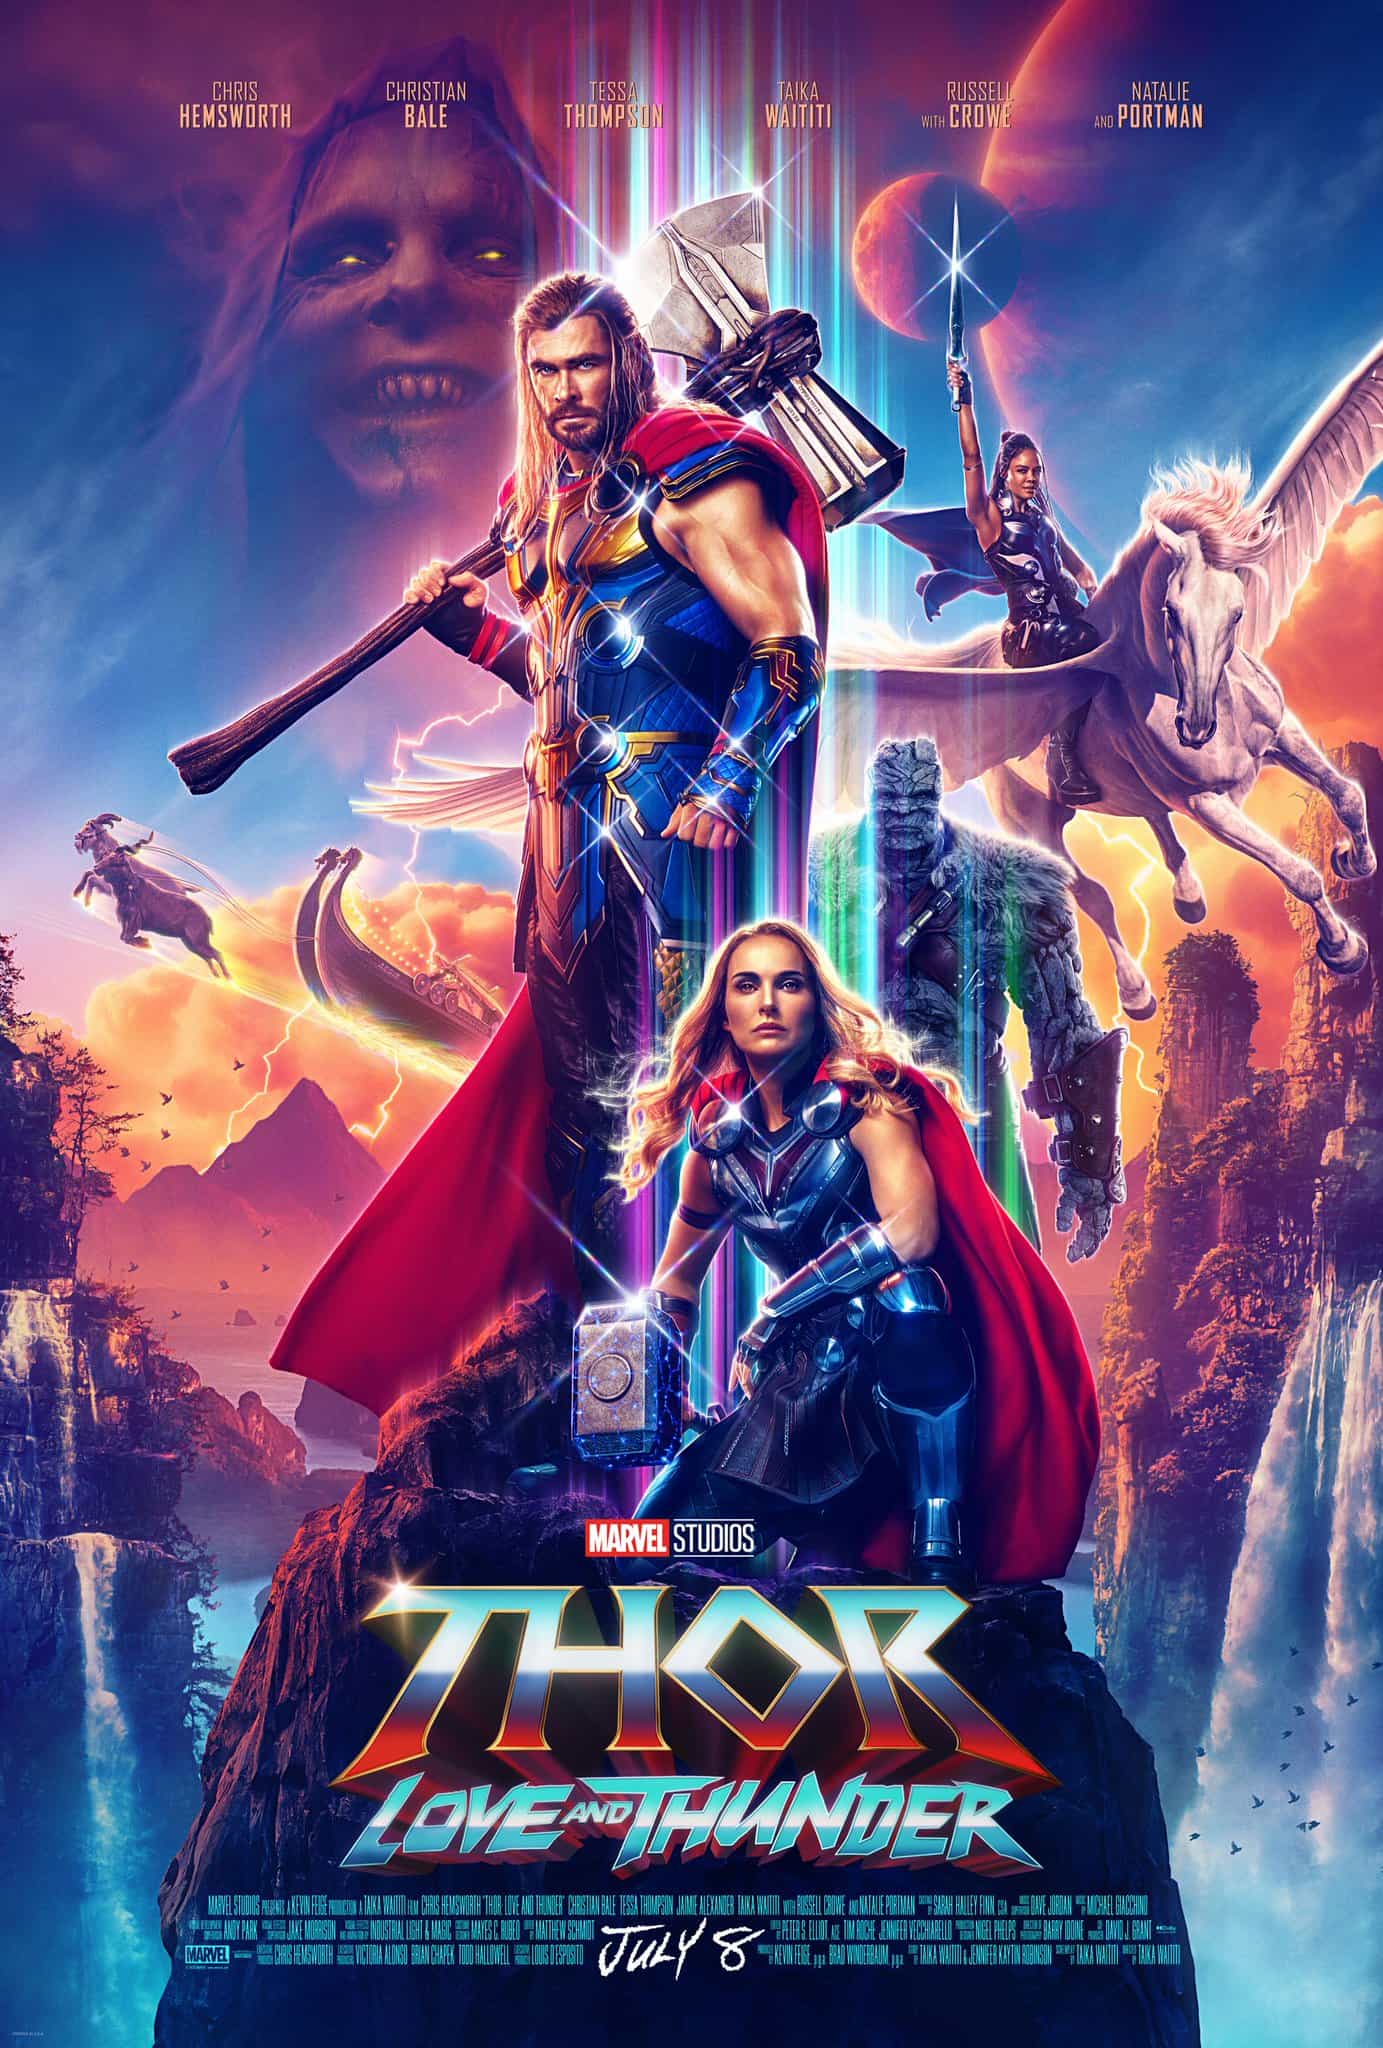 New trailer for Thor: Love and Thunder - funny, action, dark and scary!